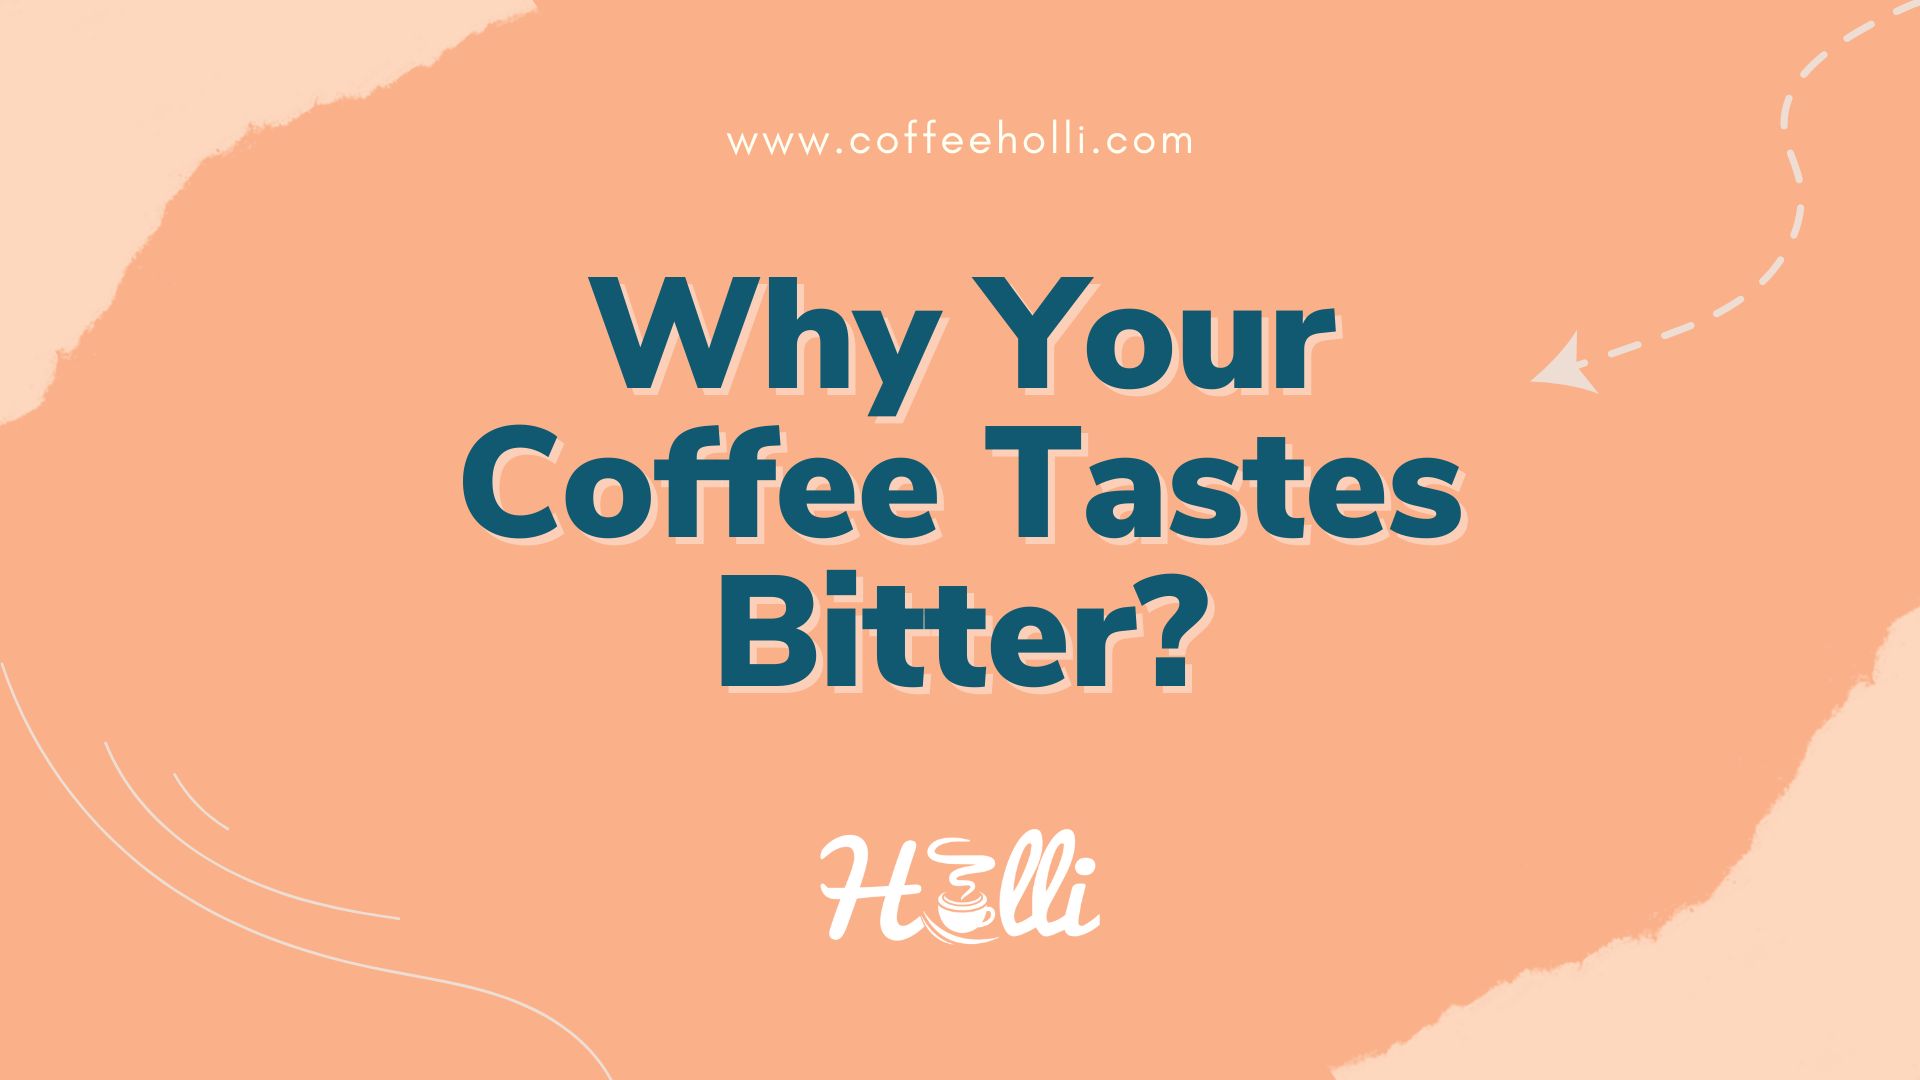 Why Your Coffee Tastes Bitter